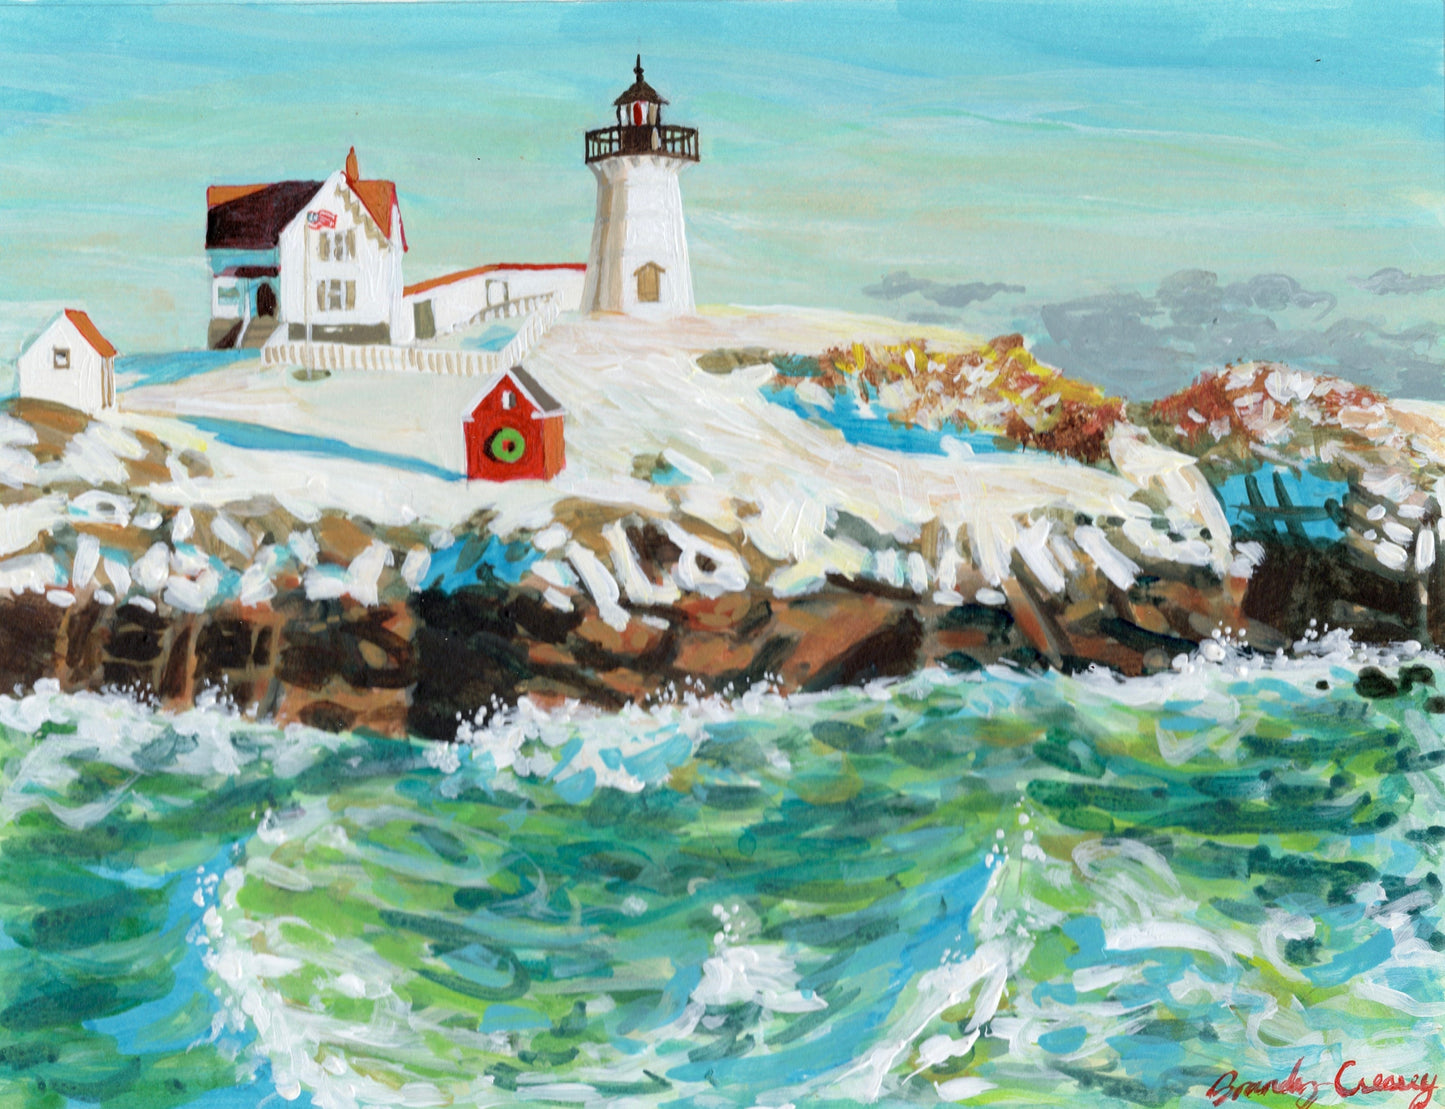 Nubble Lighthouse Painting - 8x10 Framed